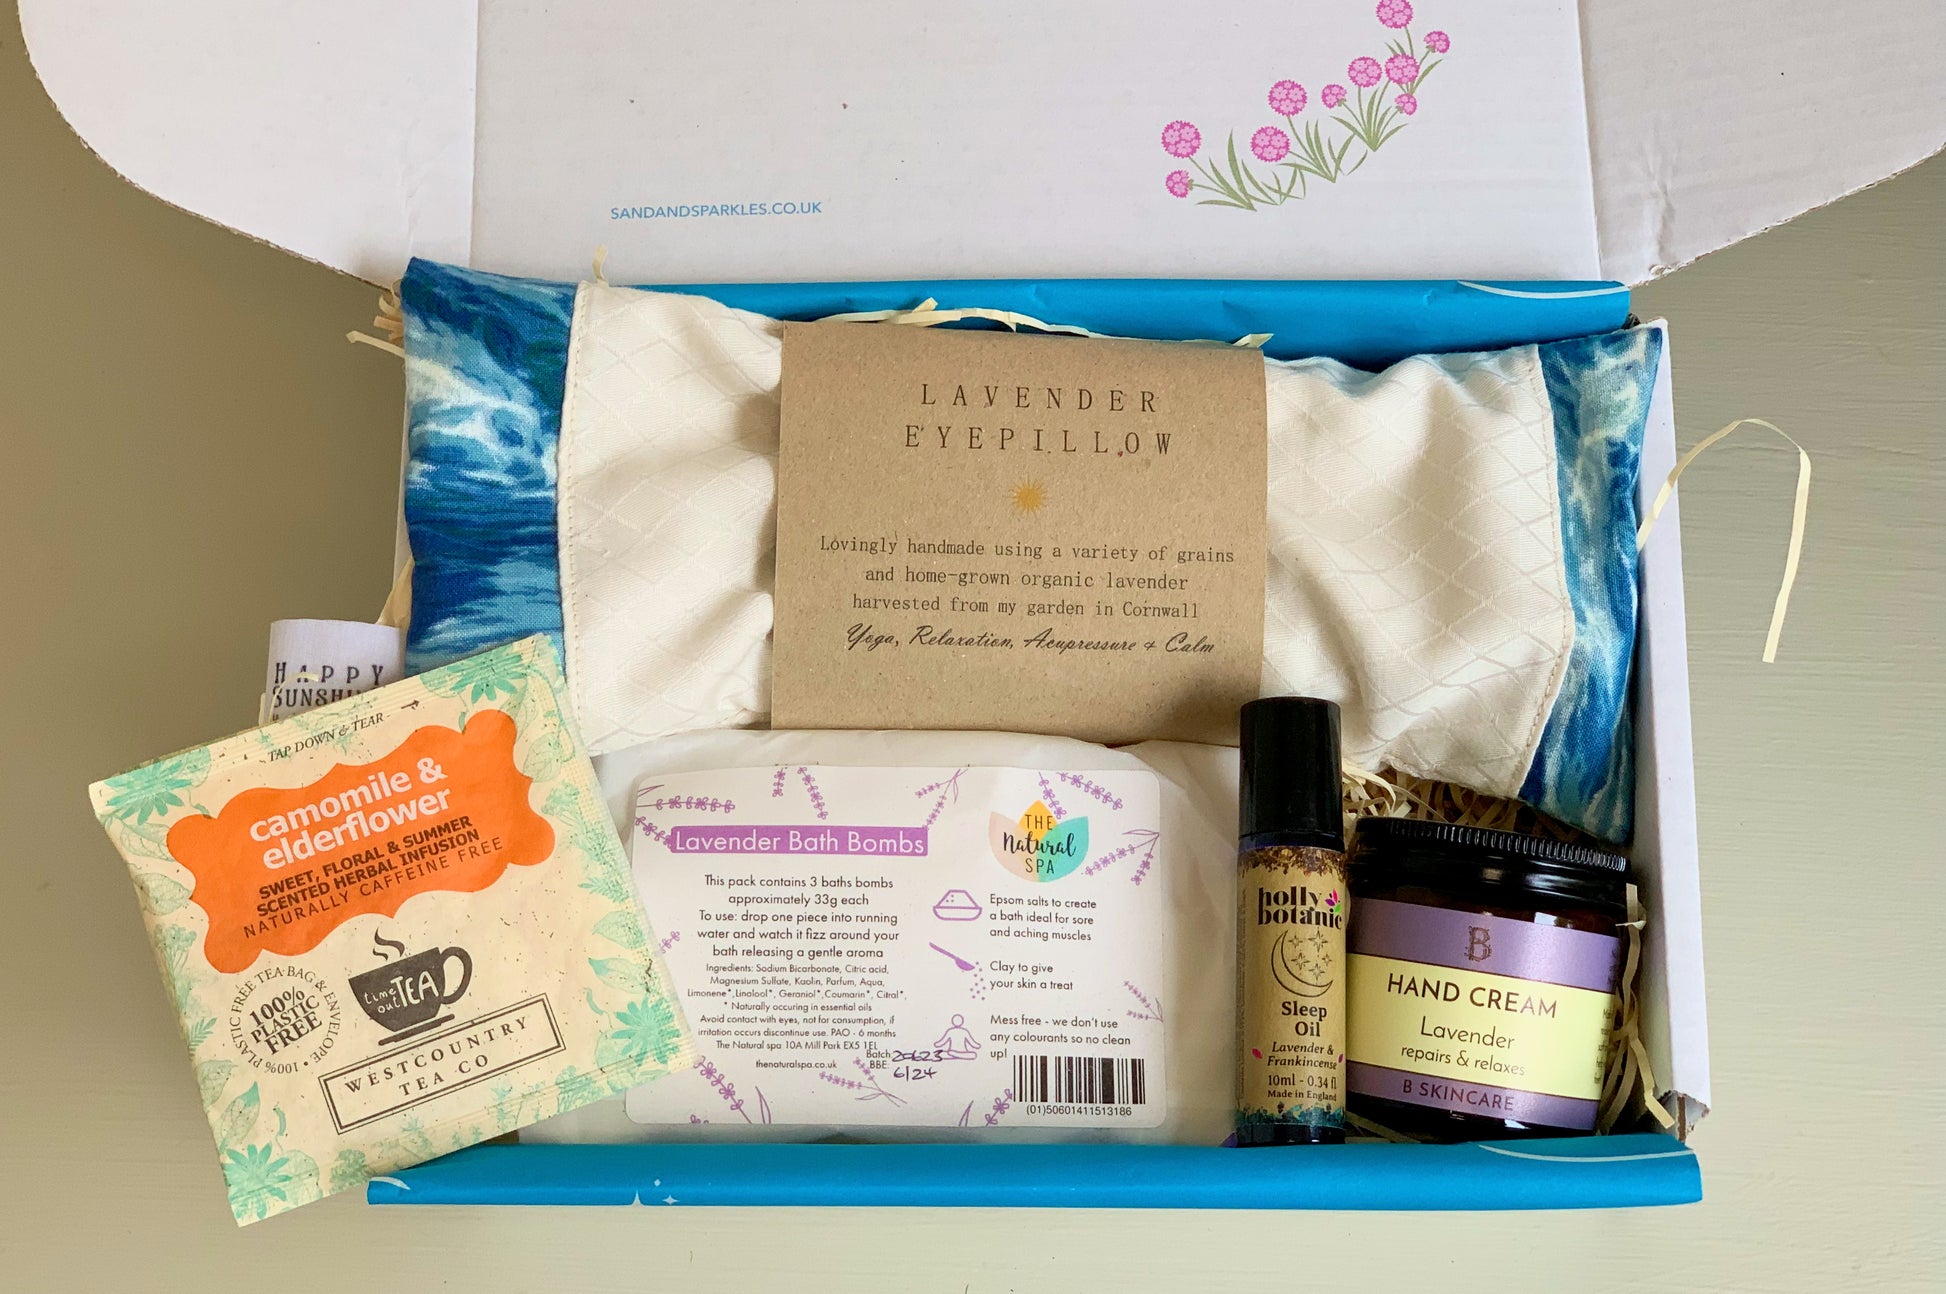 Sand & Sparkle Wellbeing Gift Set - self care pamper gift set - with organic Cornish lavender eye pillow, natural bath salts, sleep oil, hand cream and tea